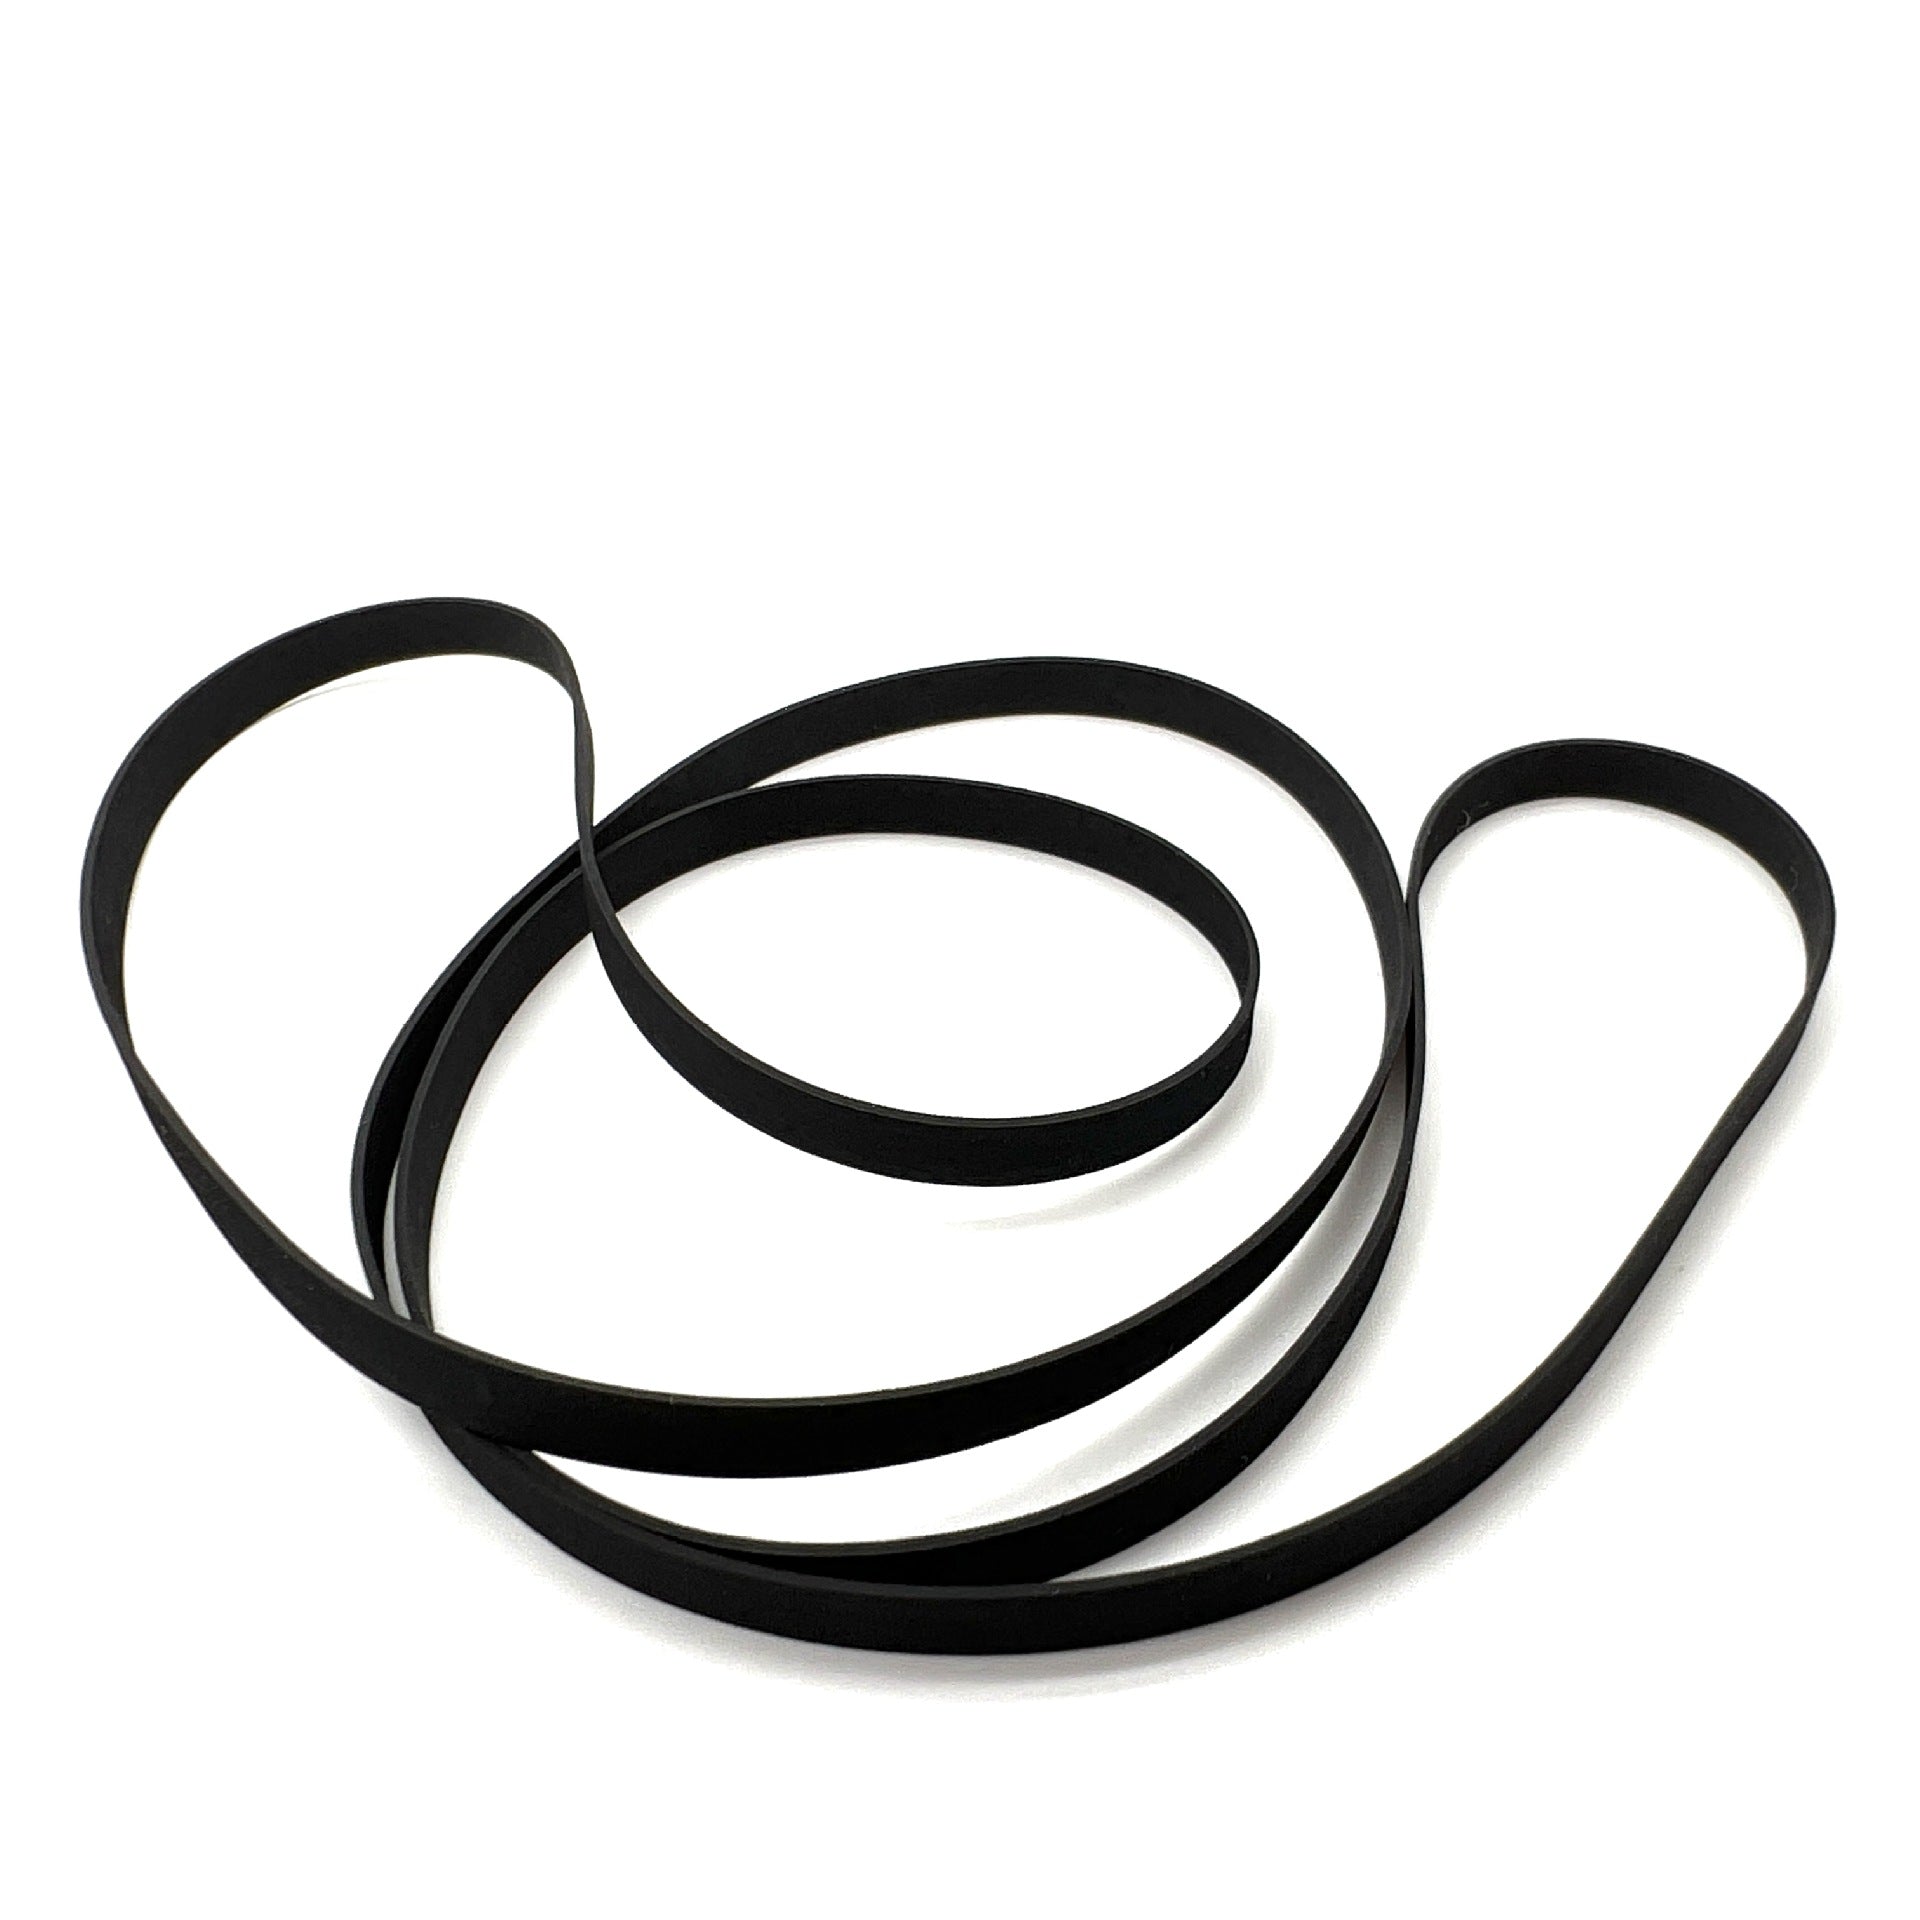 Phonograph VCR Record Player/Disc Drive Belt/Turntable Belt for Video - 200mm